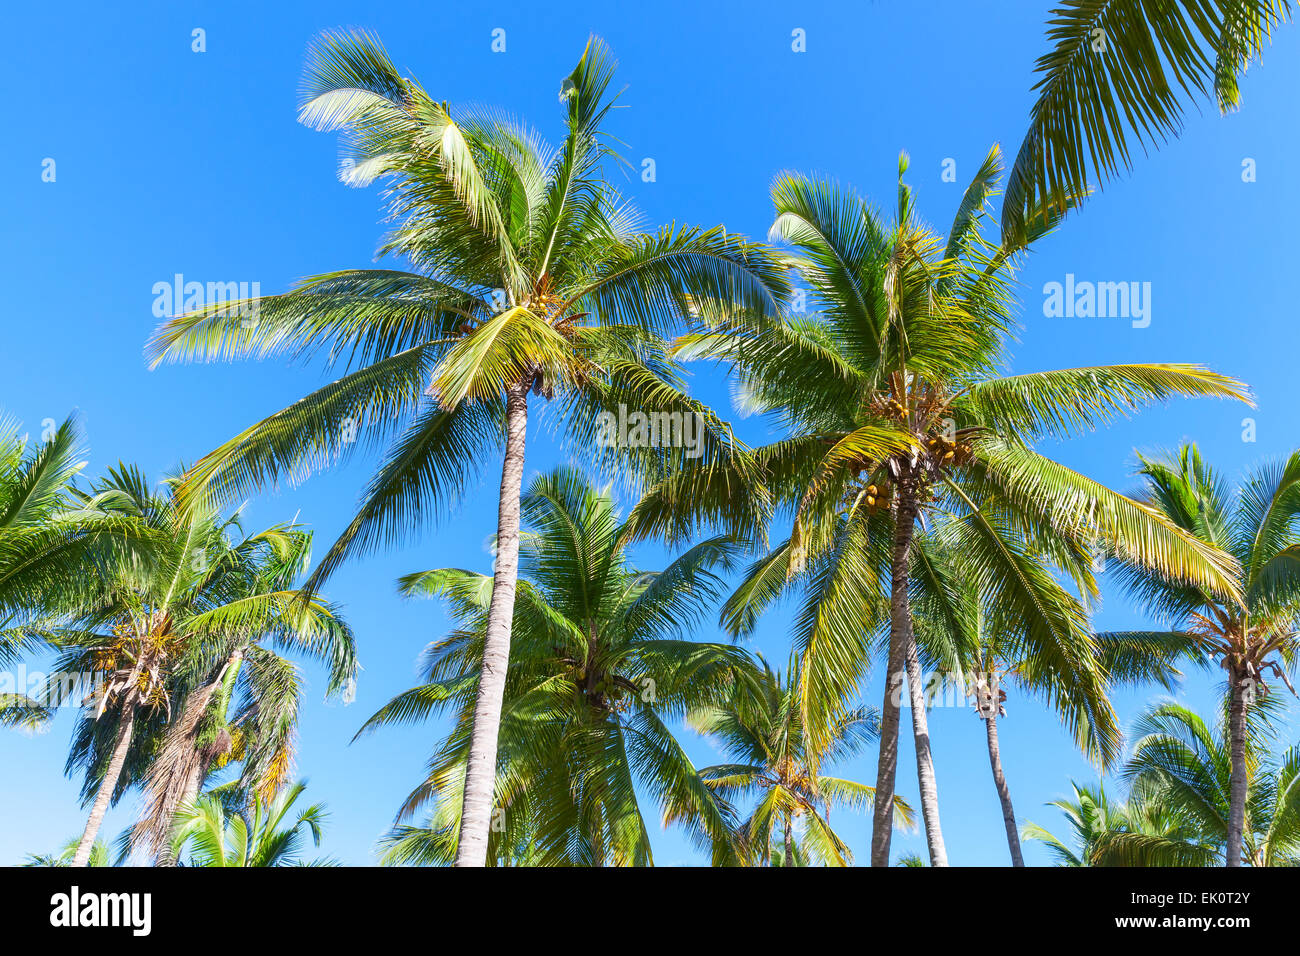 Coconut palm trees over clear blue sky background, Dominican republic Stock Photo